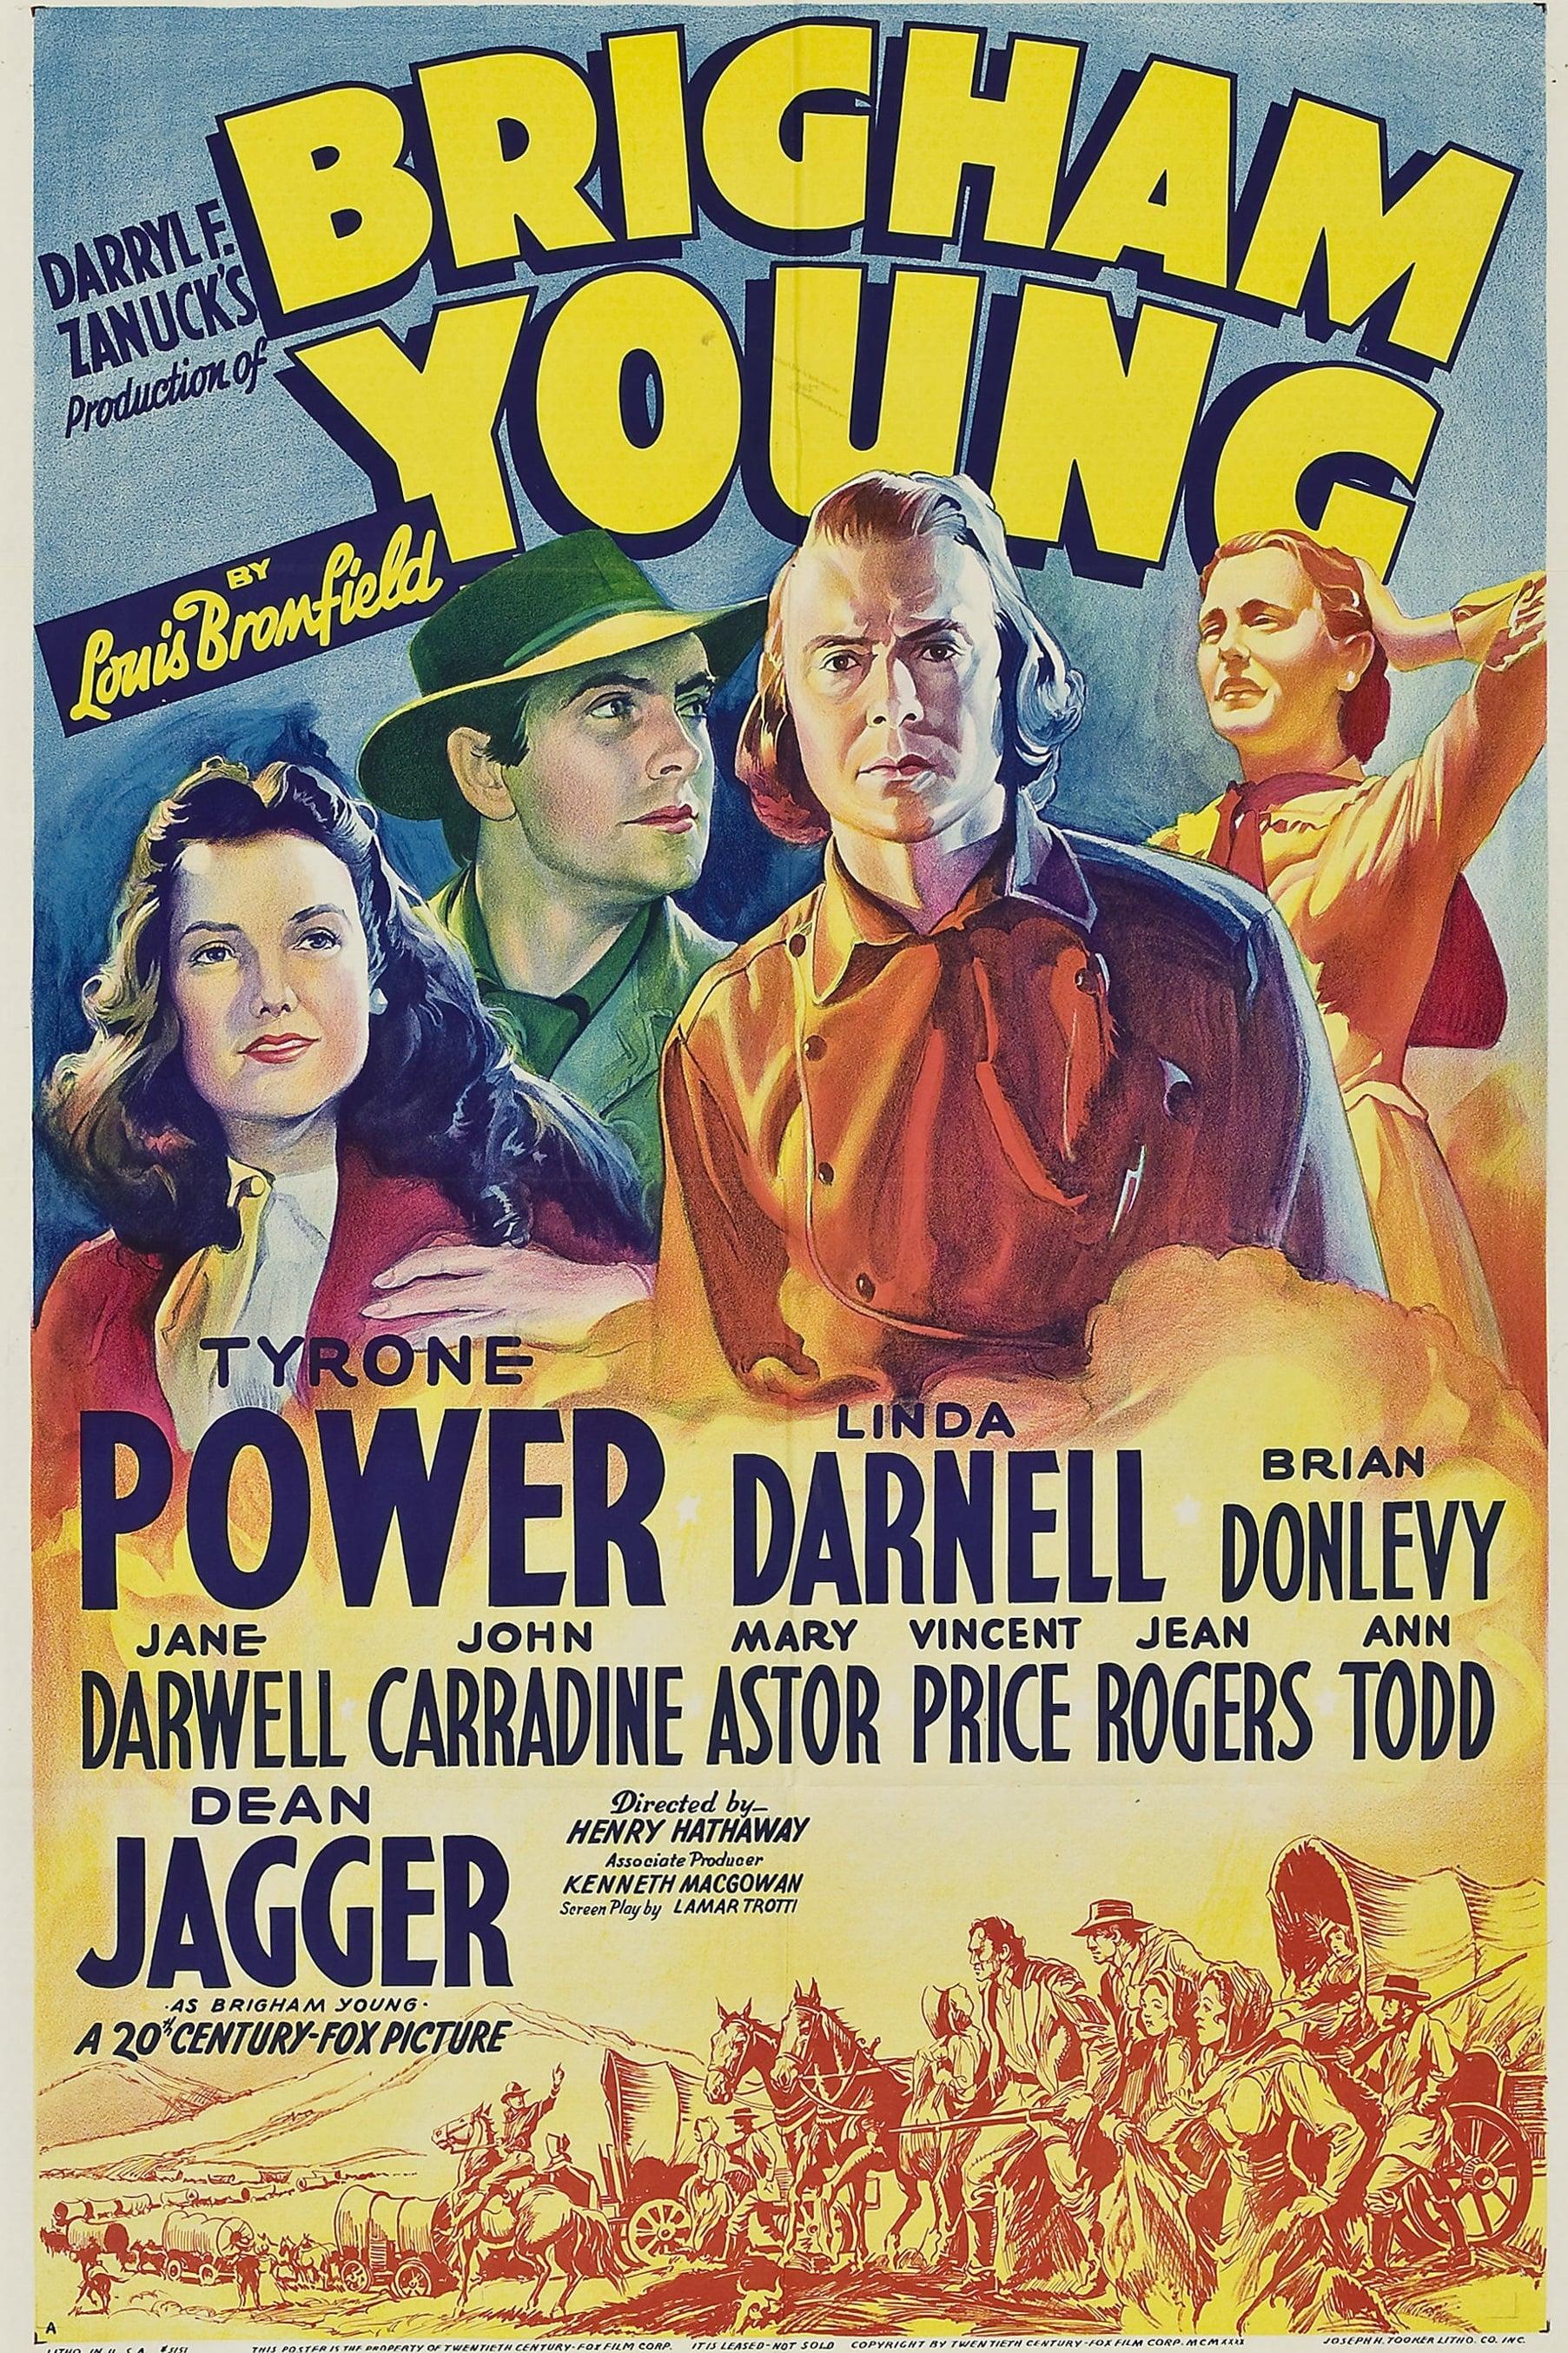 Brigham Young poster